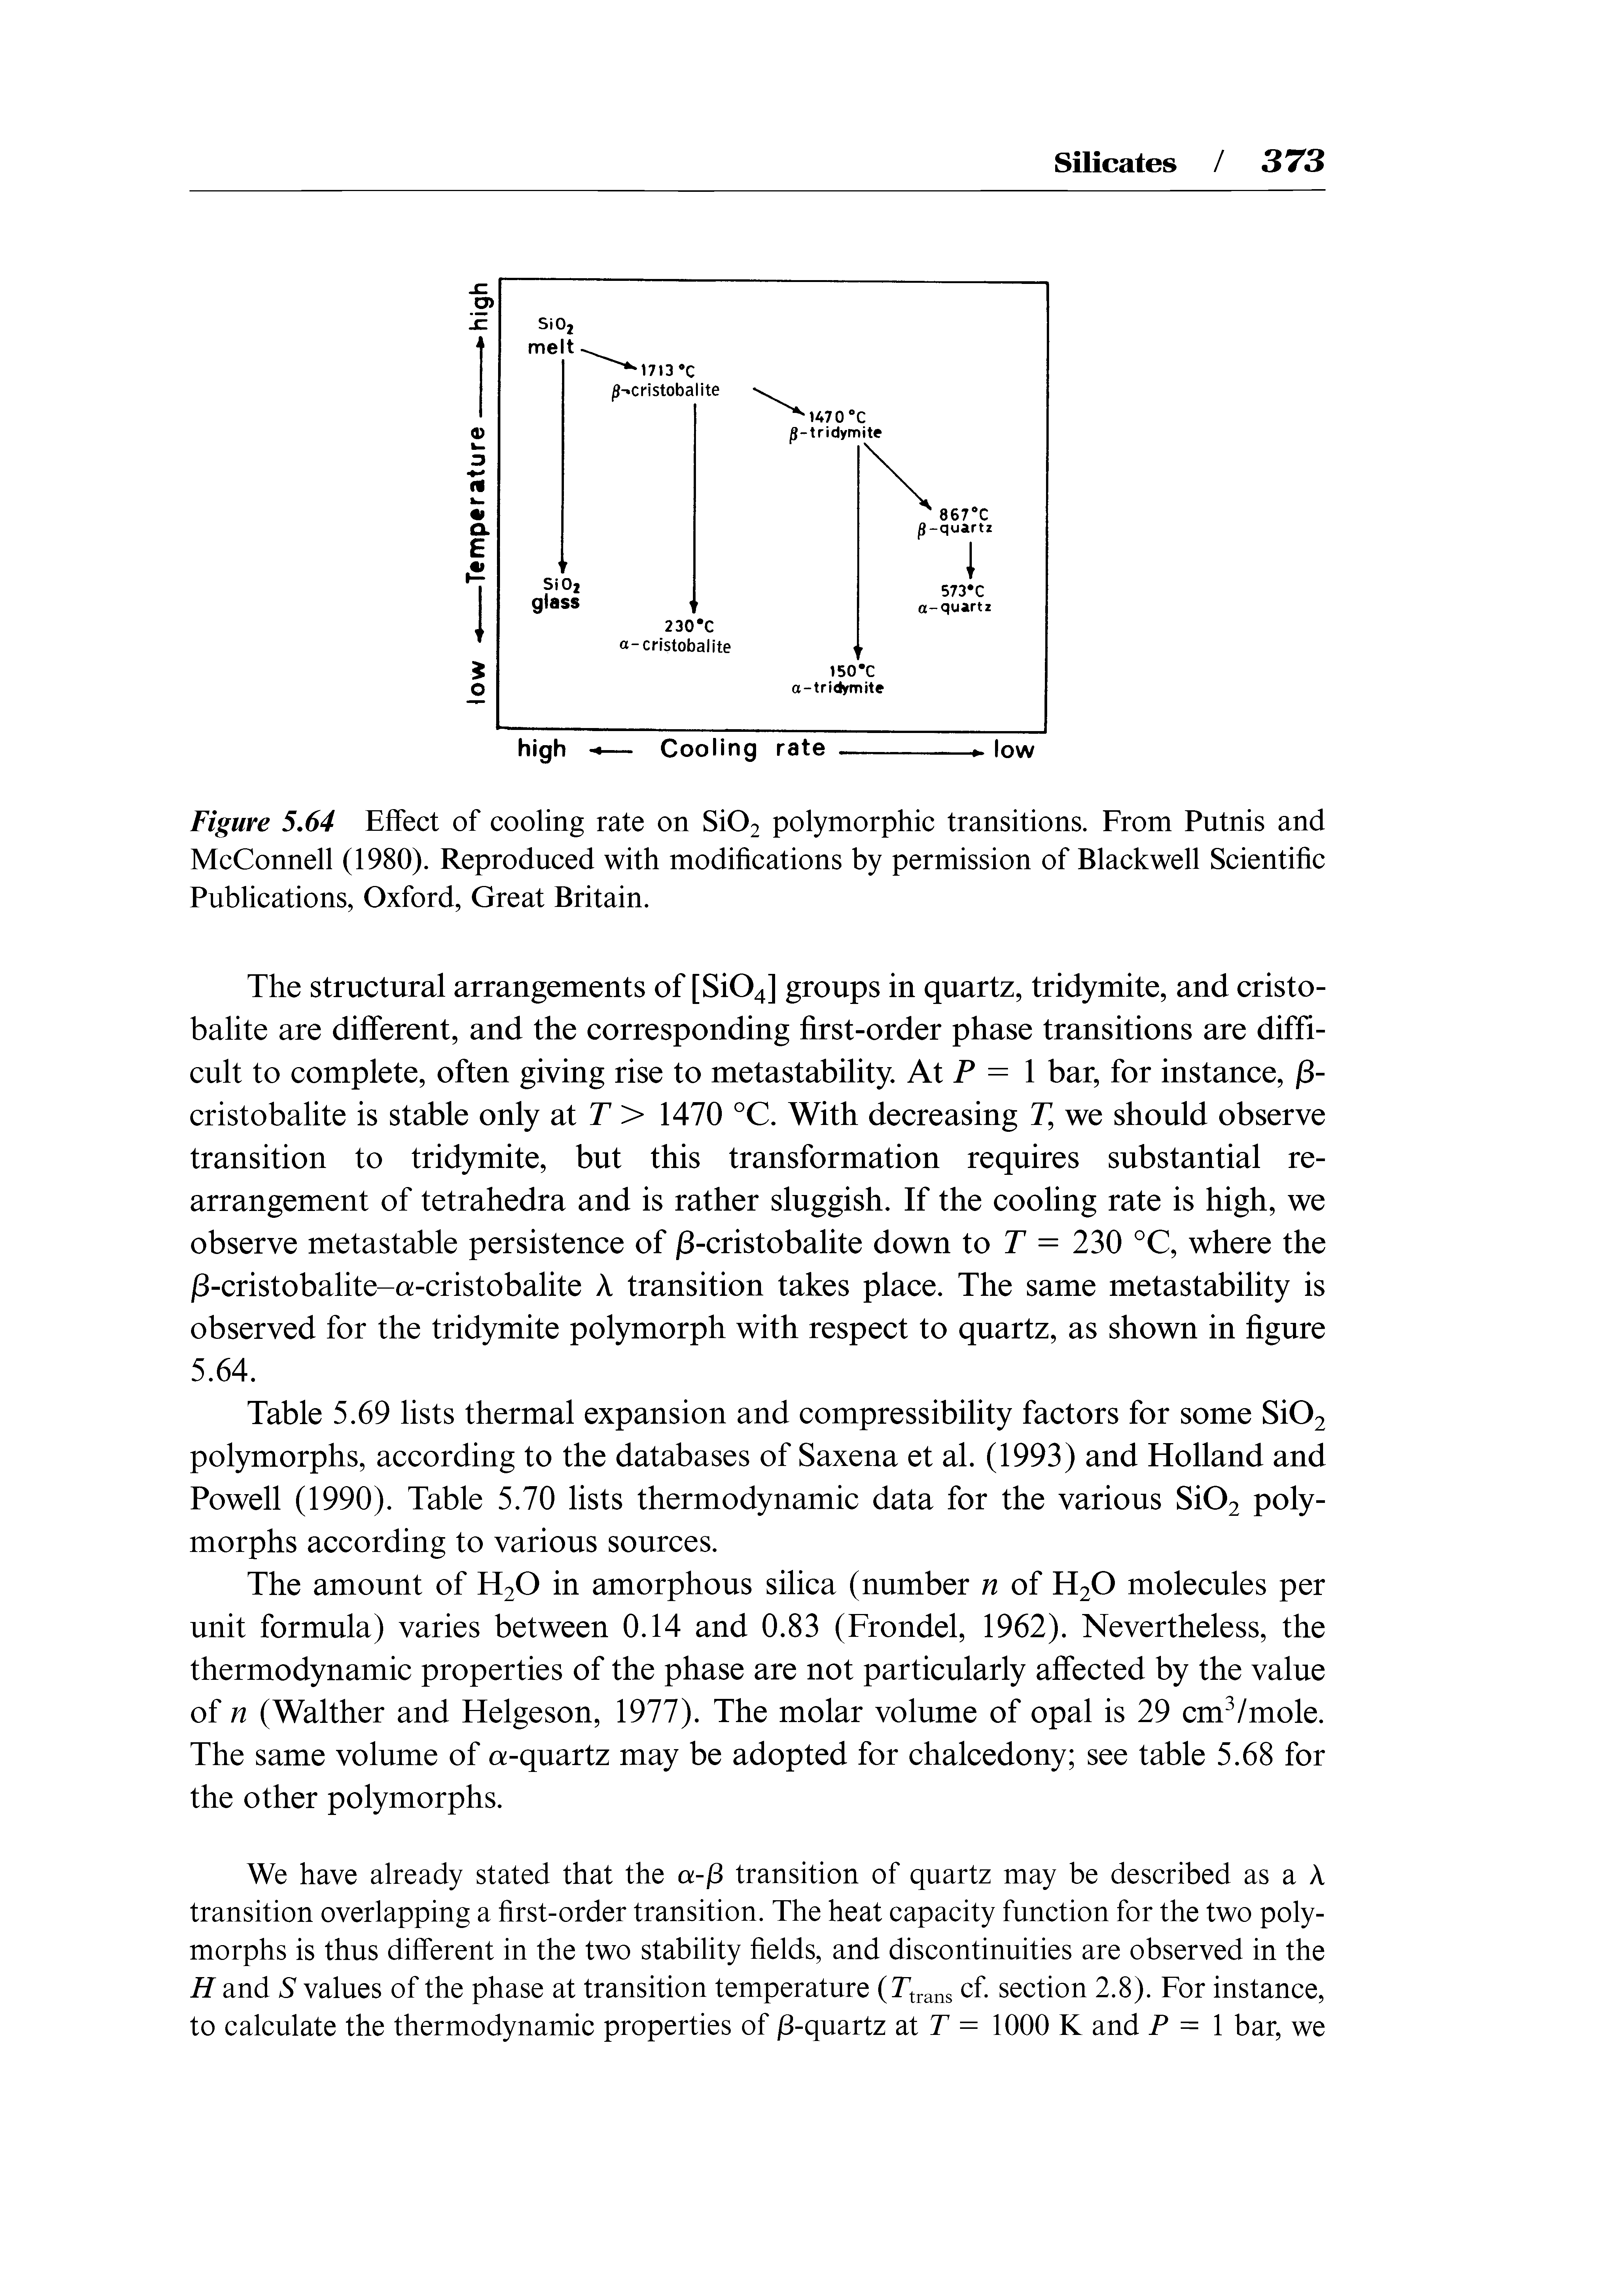 Figure 5.64 Effect of cooling rate on Si02 polymorphic transitions. From Putnis and McConnell (1980). Reproduced with modifications by permission of Blackwell Scientific Publications, Oxford, Great Britain.